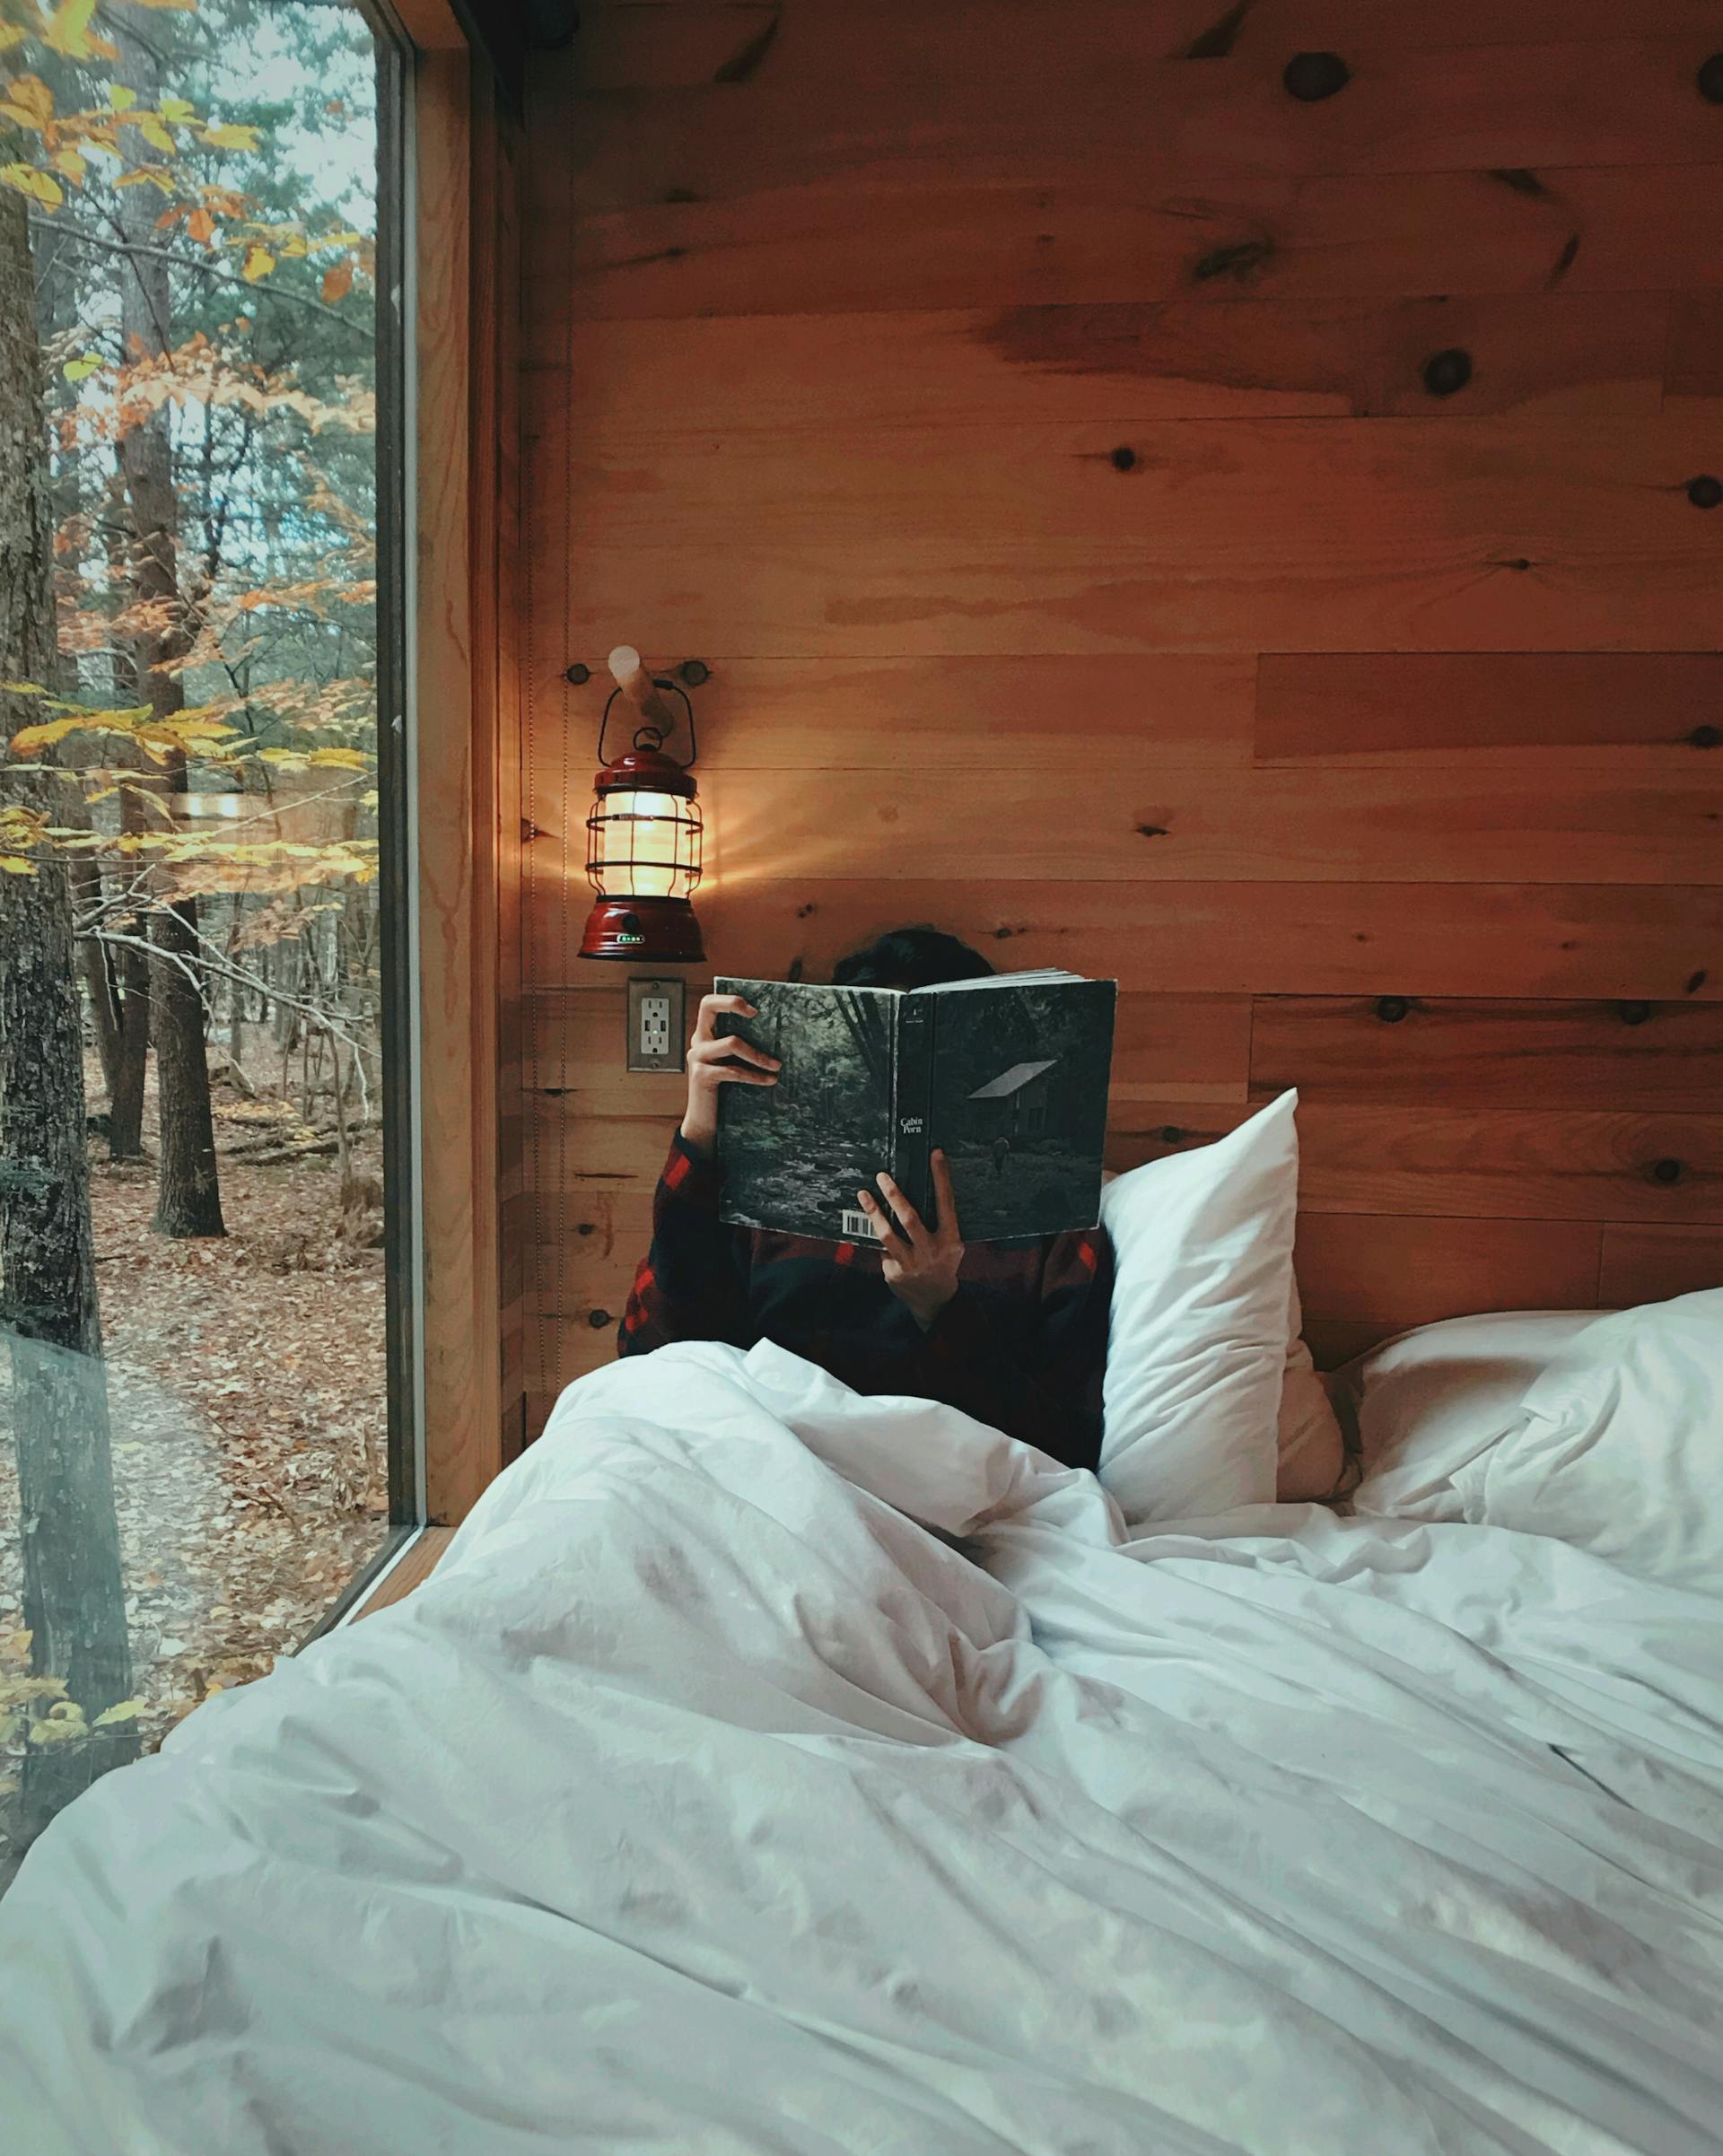 A person sitting in bed in a cabin | Source: Pexels